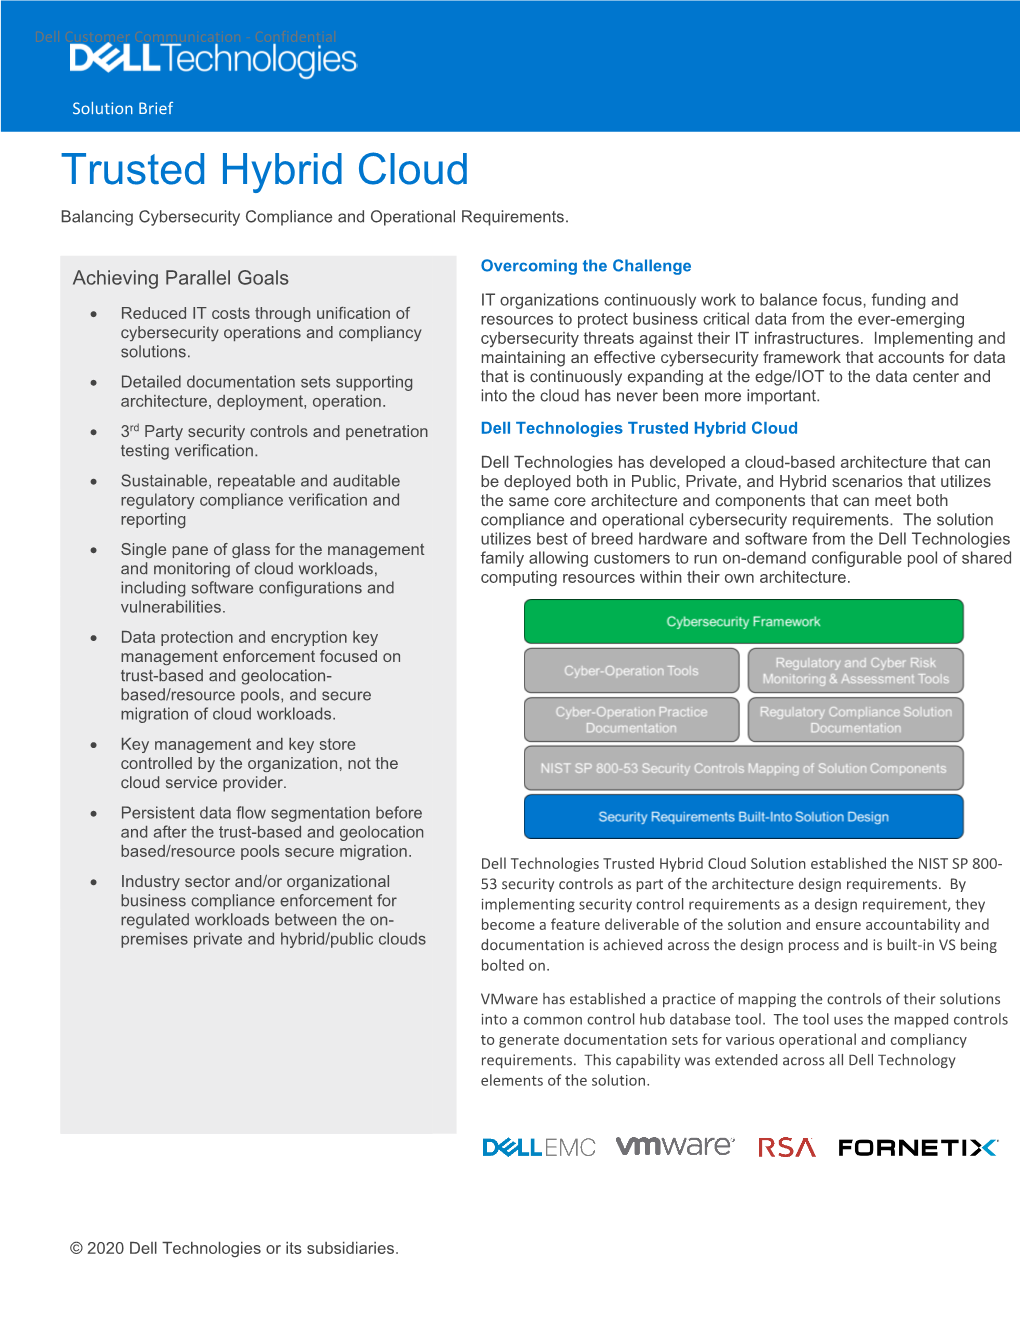 Trusted Hybrid Cloud Balancing Cybersecurity Compliance and Operational Requirements